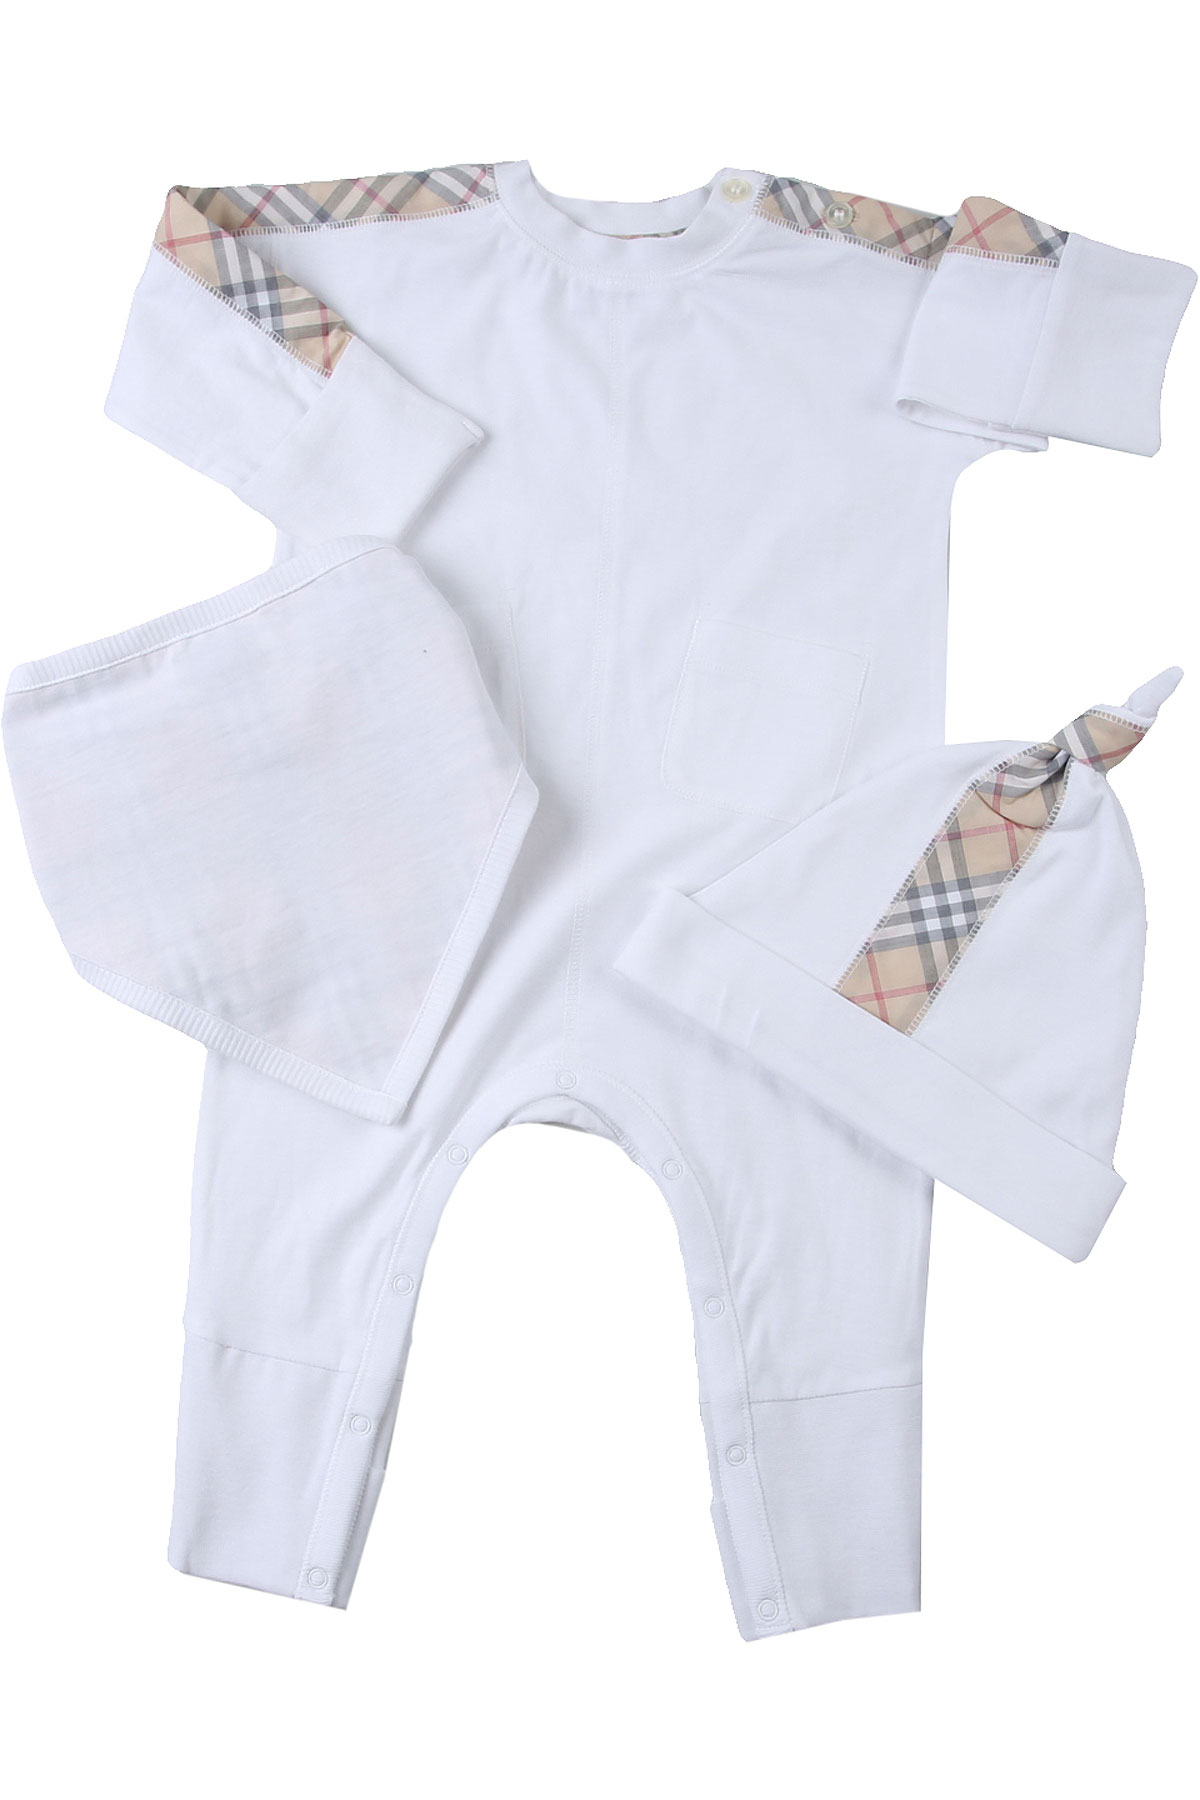 Baby Girl Clothing Burberry, Style code: 8014073-a1464-